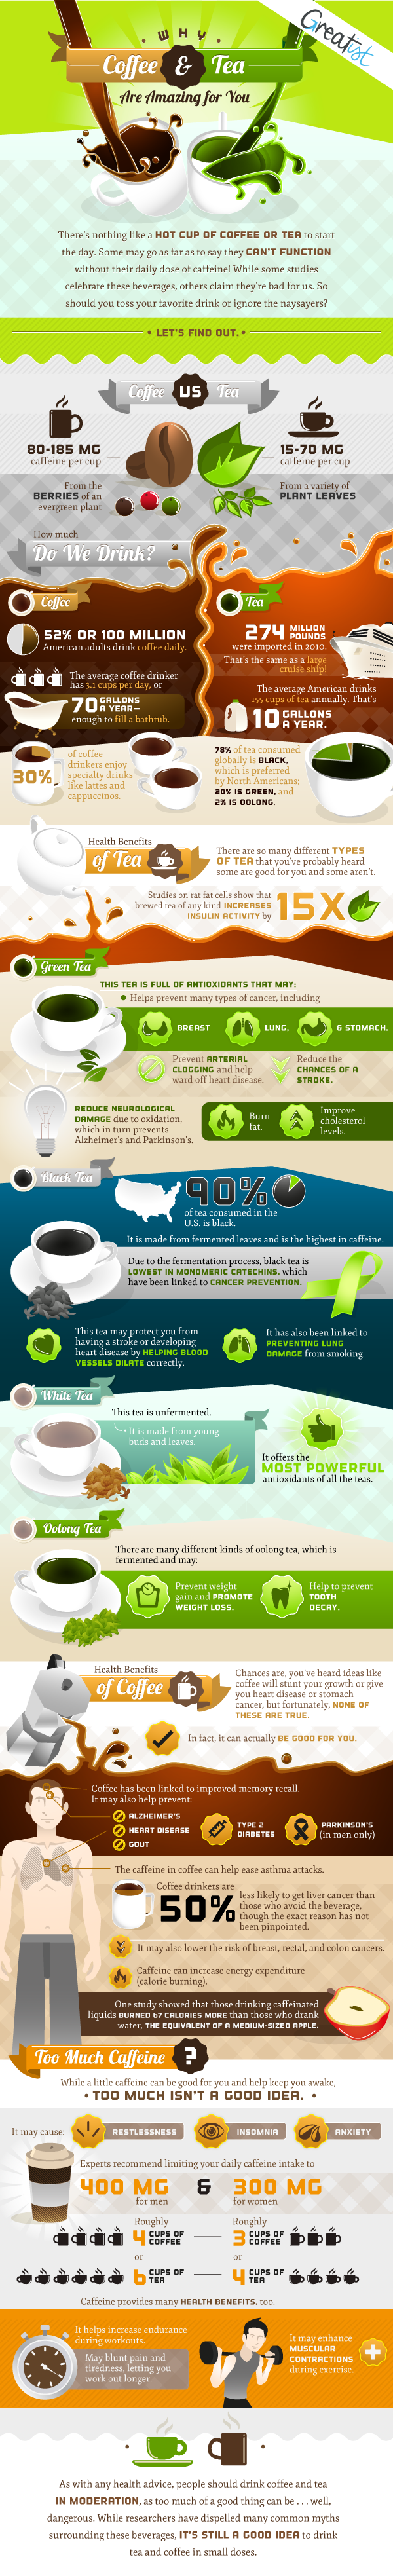 Why Coffee & Tea Are Amazing for You by Greatist